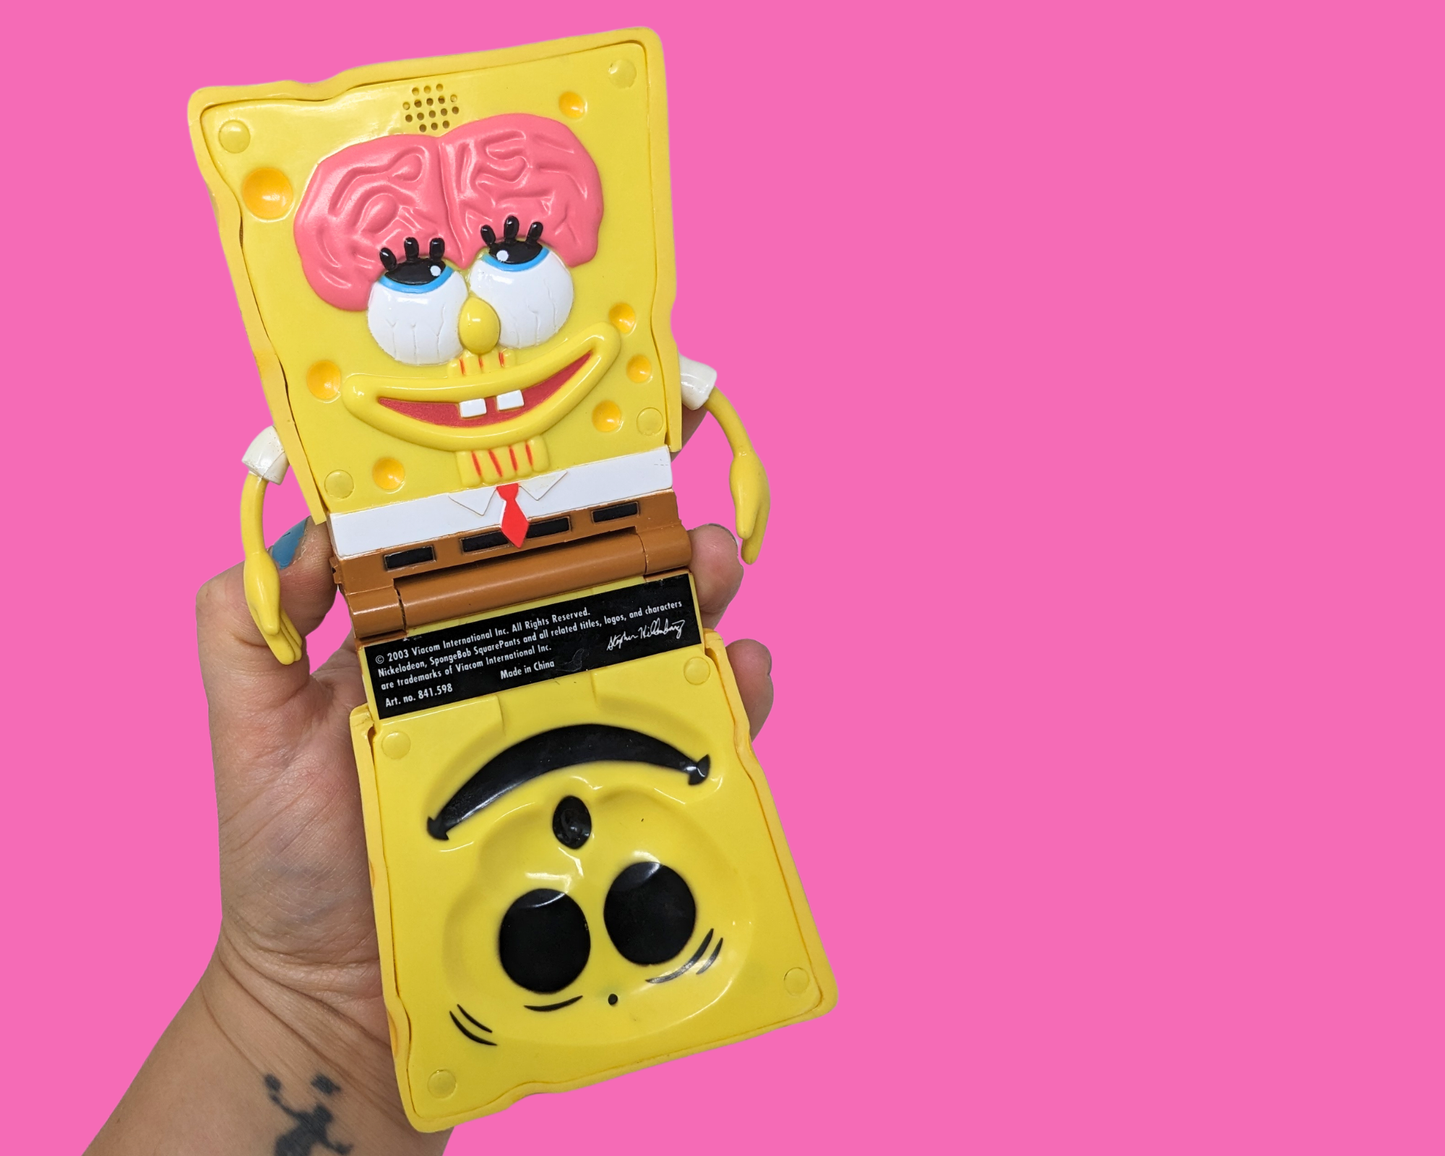 Y2K Sponge Bob Square Pants Telephone, Works But Doesn't Ring